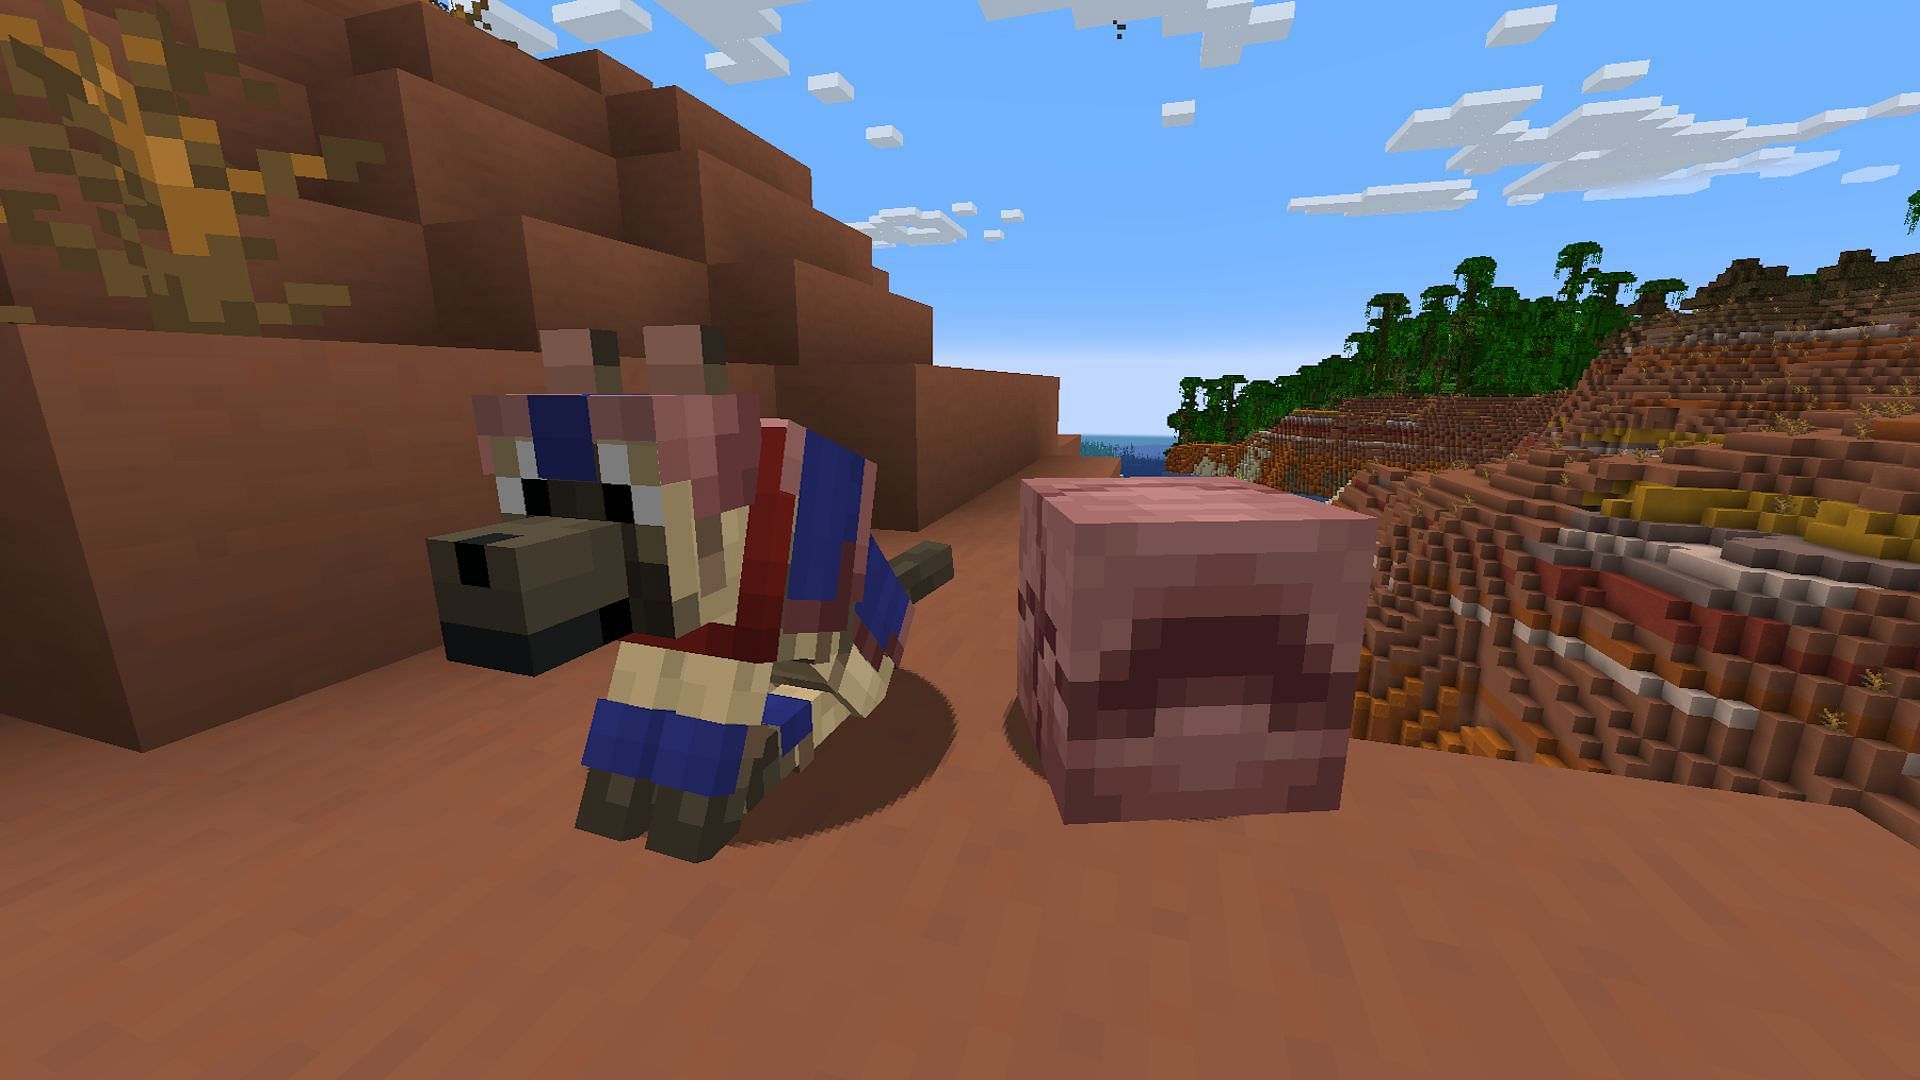 Only time will tell if this sets a new minor update (Image via Mojang)